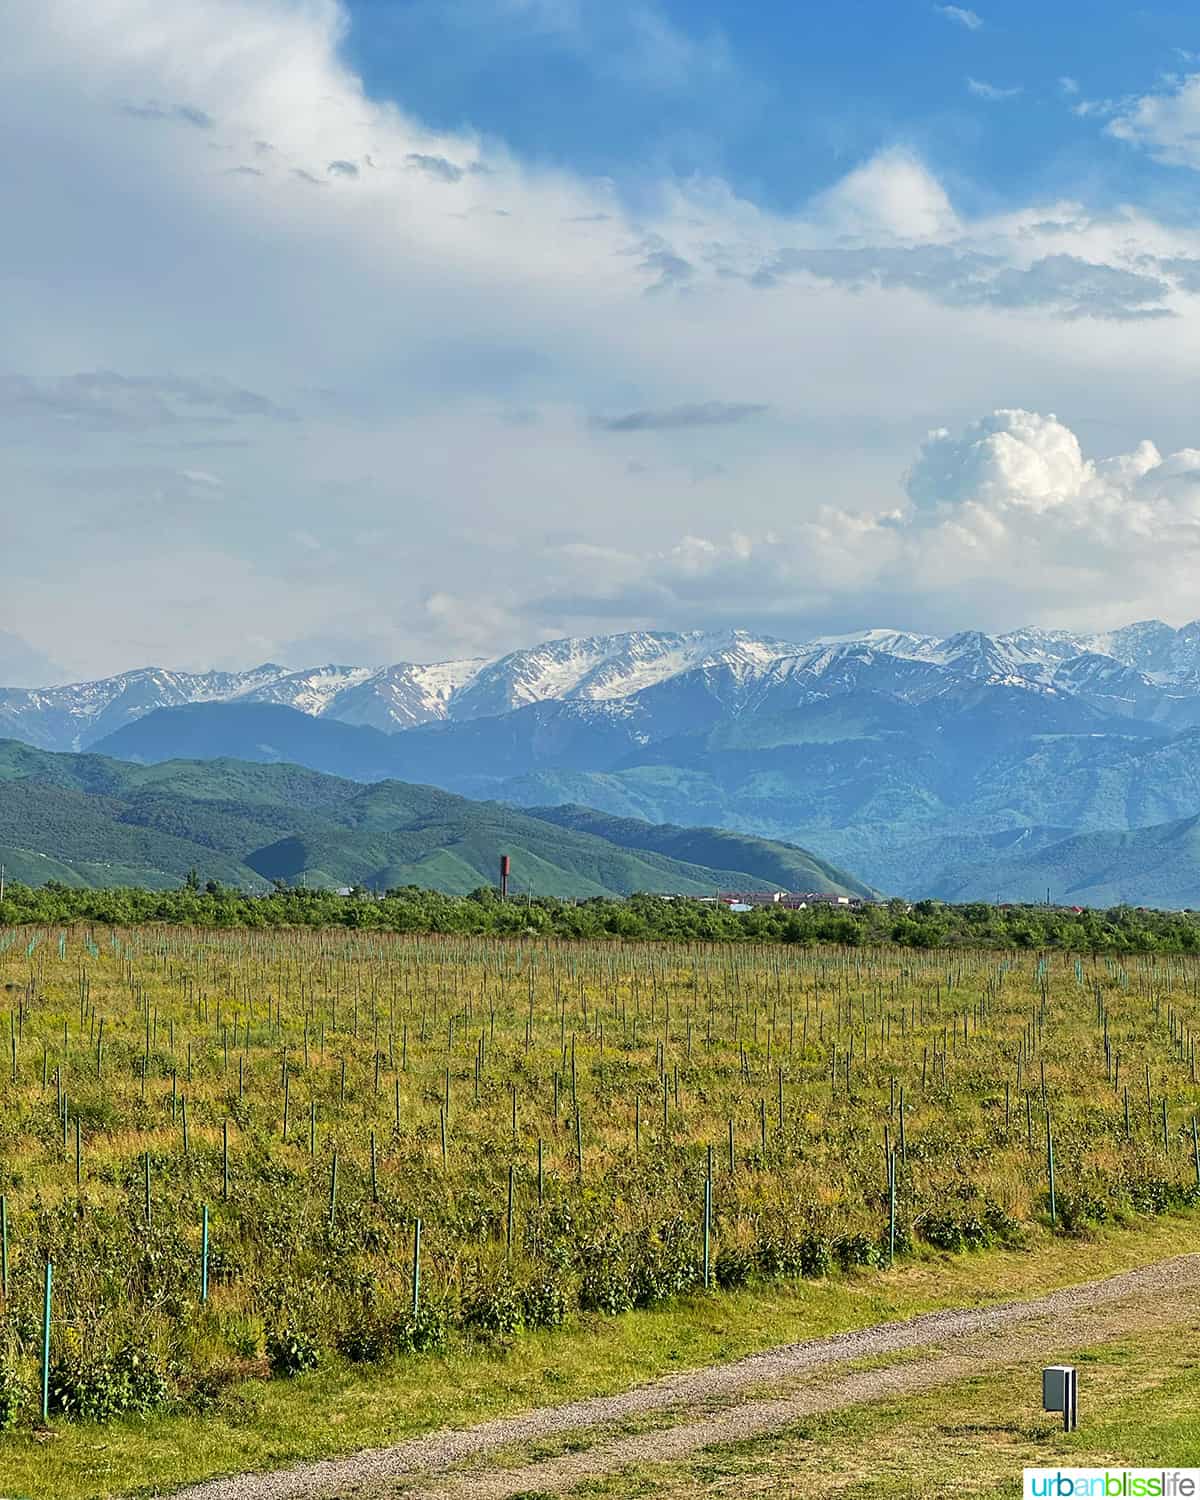 beautiful Kazakhstan vineyards with the Tien Shan Mountains in the background.